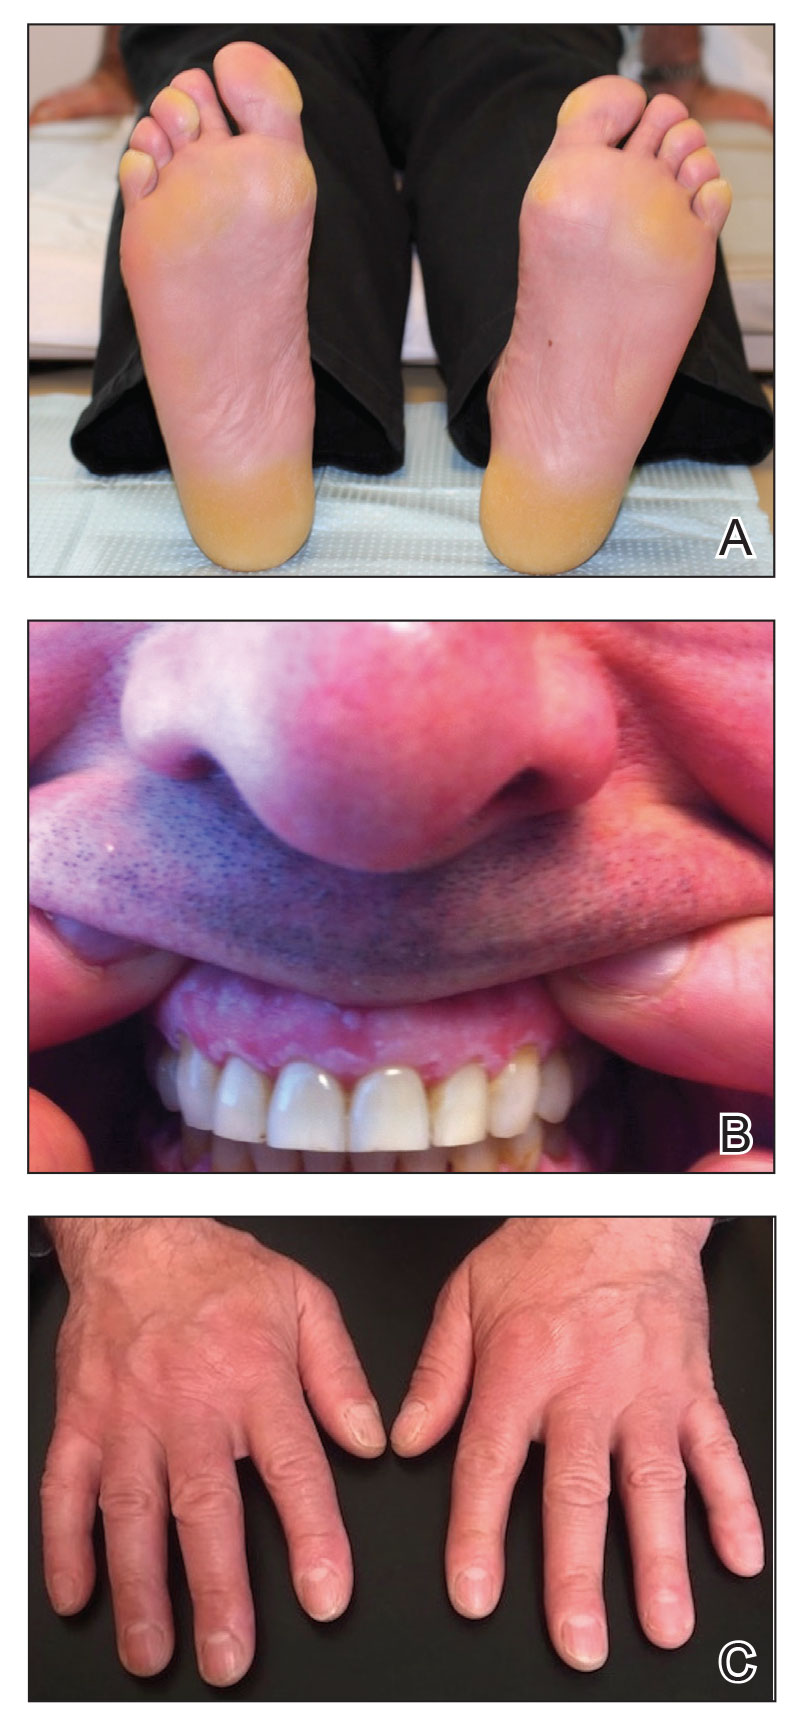 A, Painful focal keratoderma most prominent at pressure points on the soles and toes. B, Gingival hyperkeratosis and oral leukokeratosis. C, Nails without thickening of plates or discoloration.